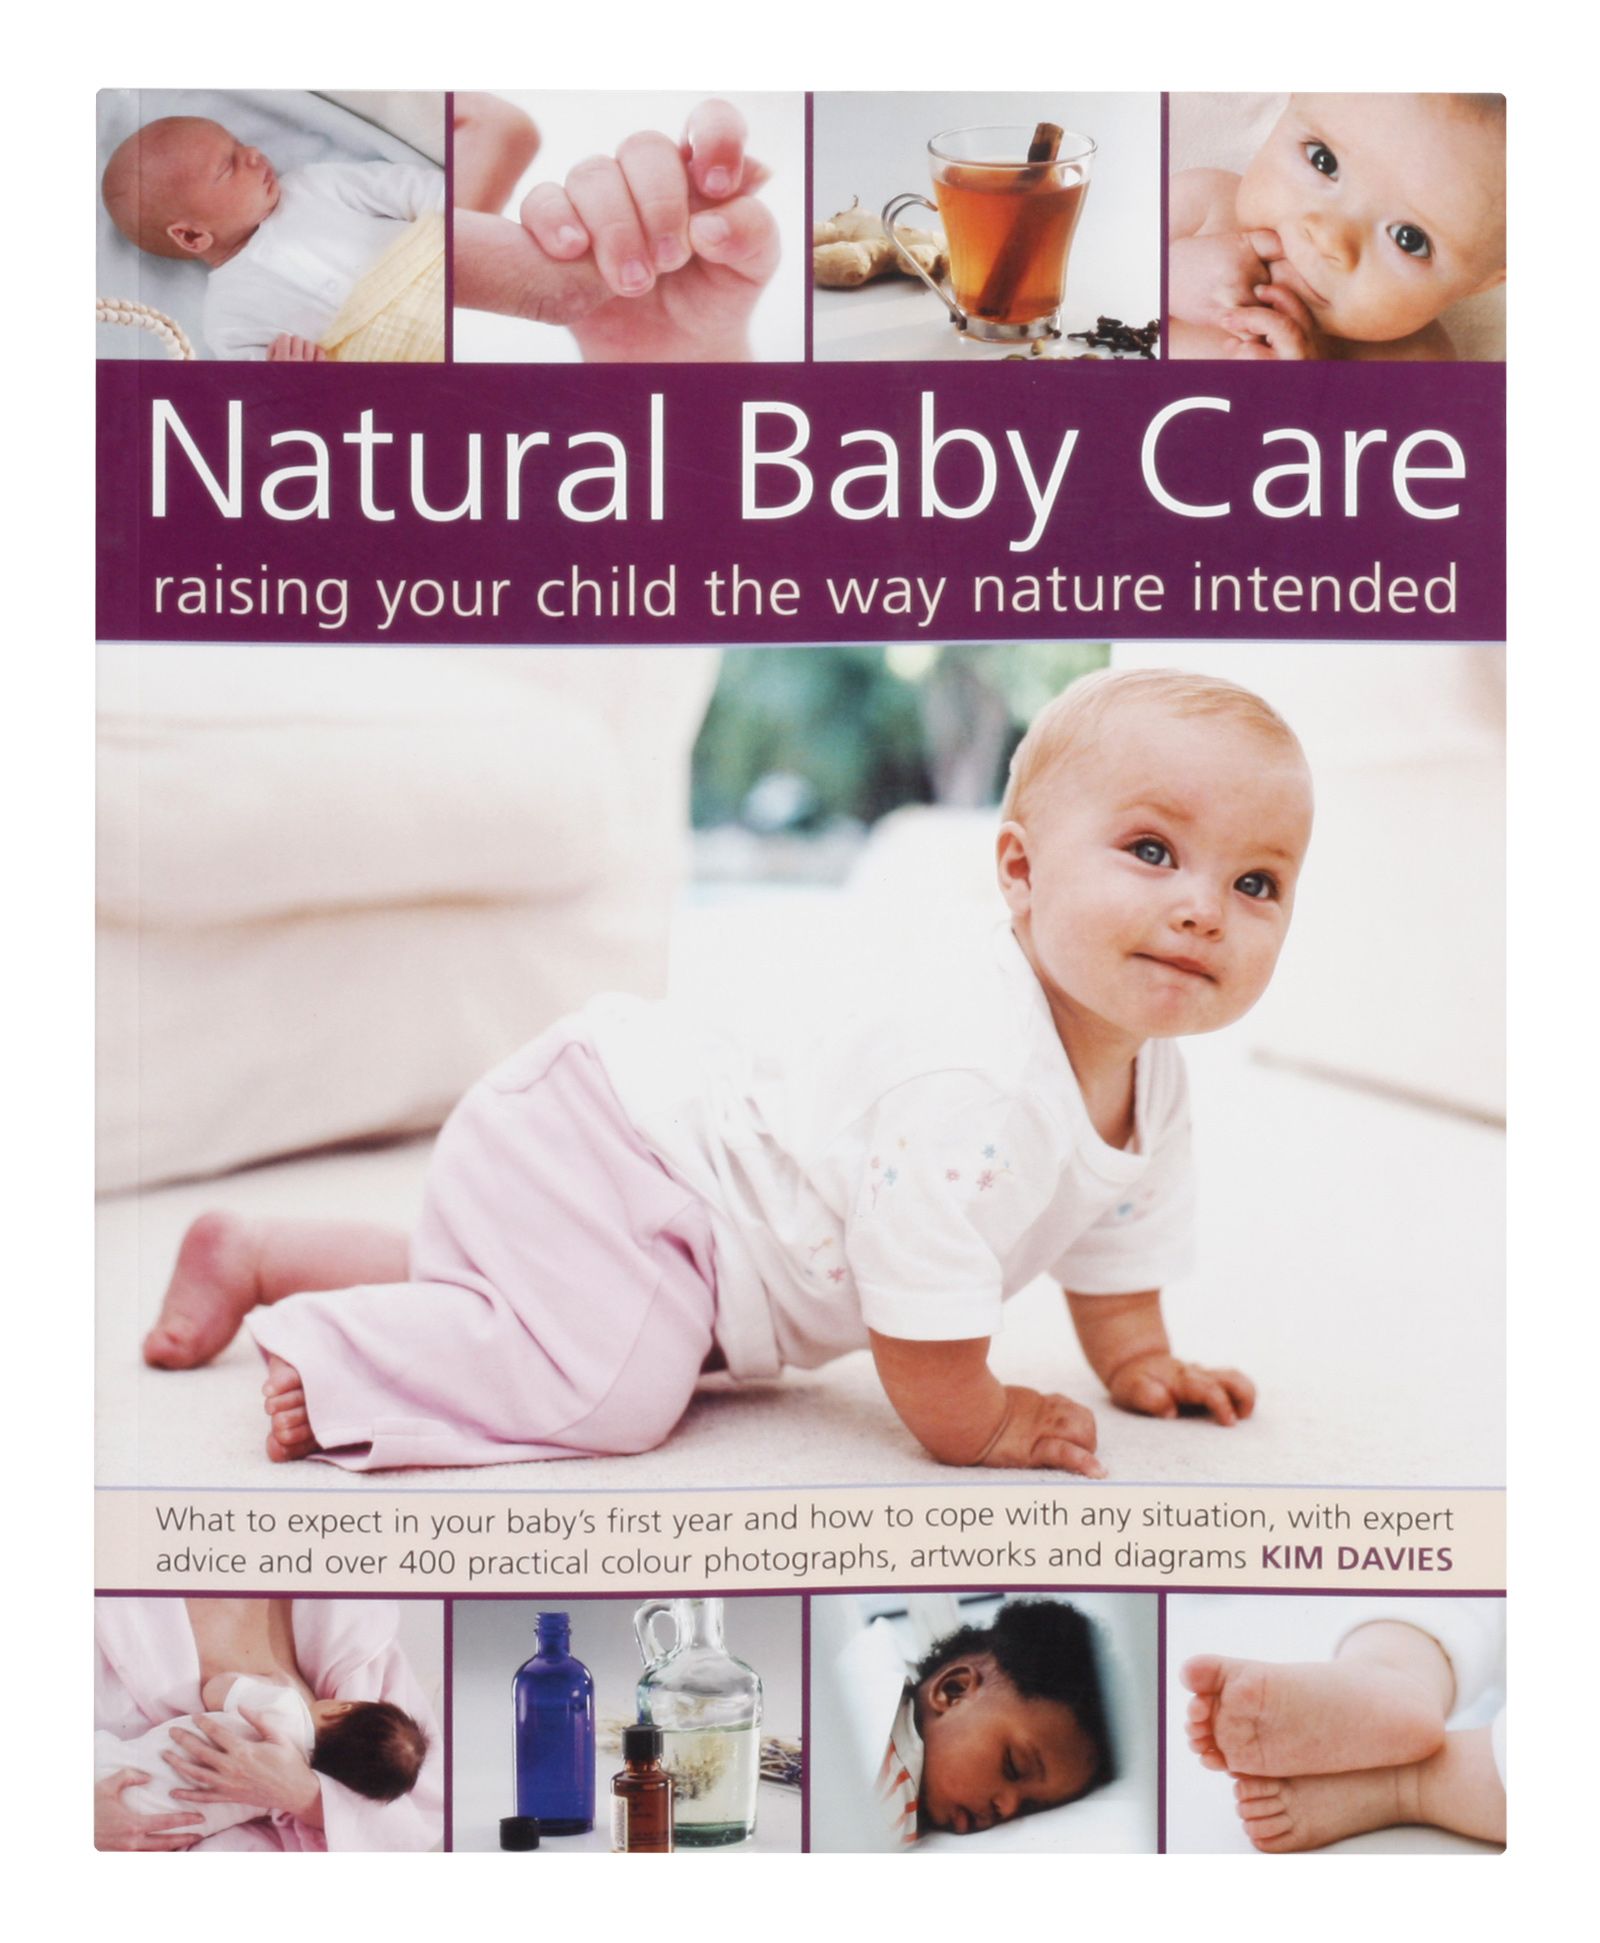 Natural baby Care (Raising Your Child the Way Nature Intended)